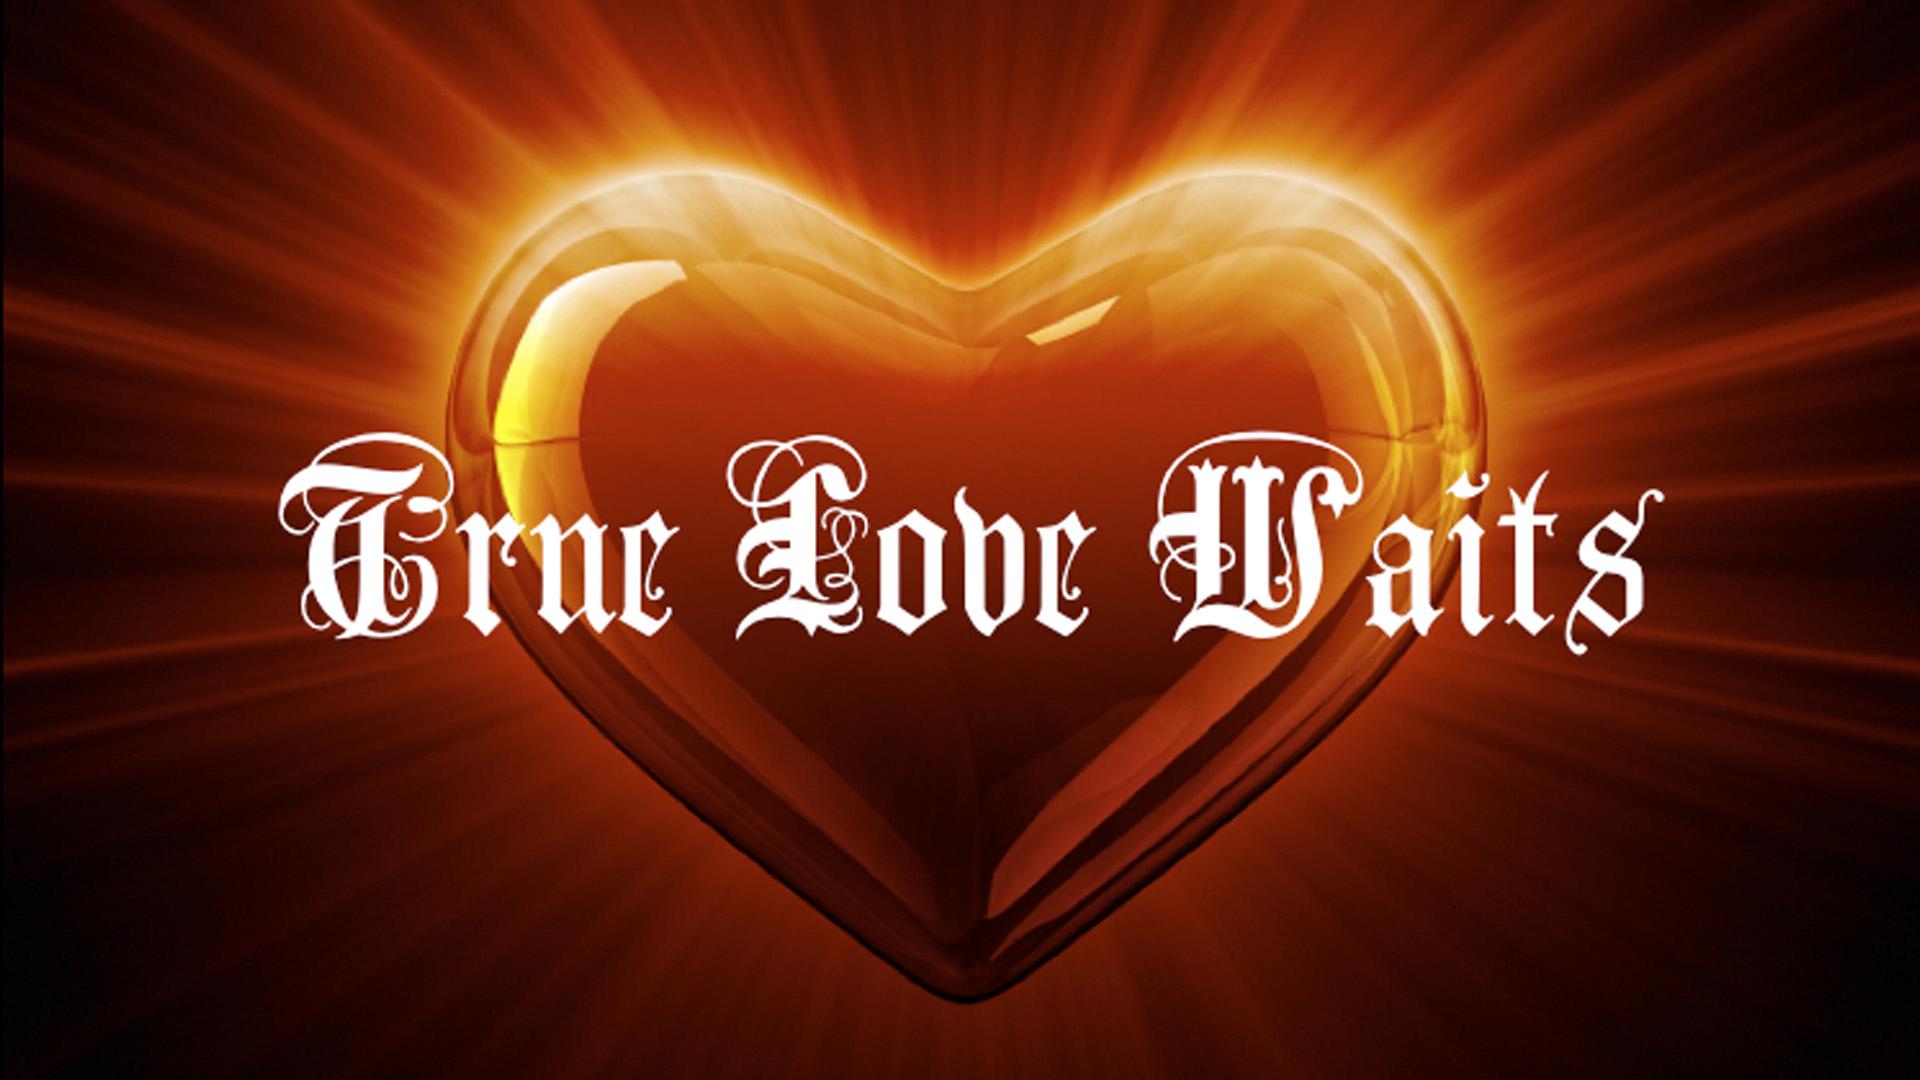 1920x1080 Background Of True Love Cave On Real Wallpaper In Hd Image Pc P